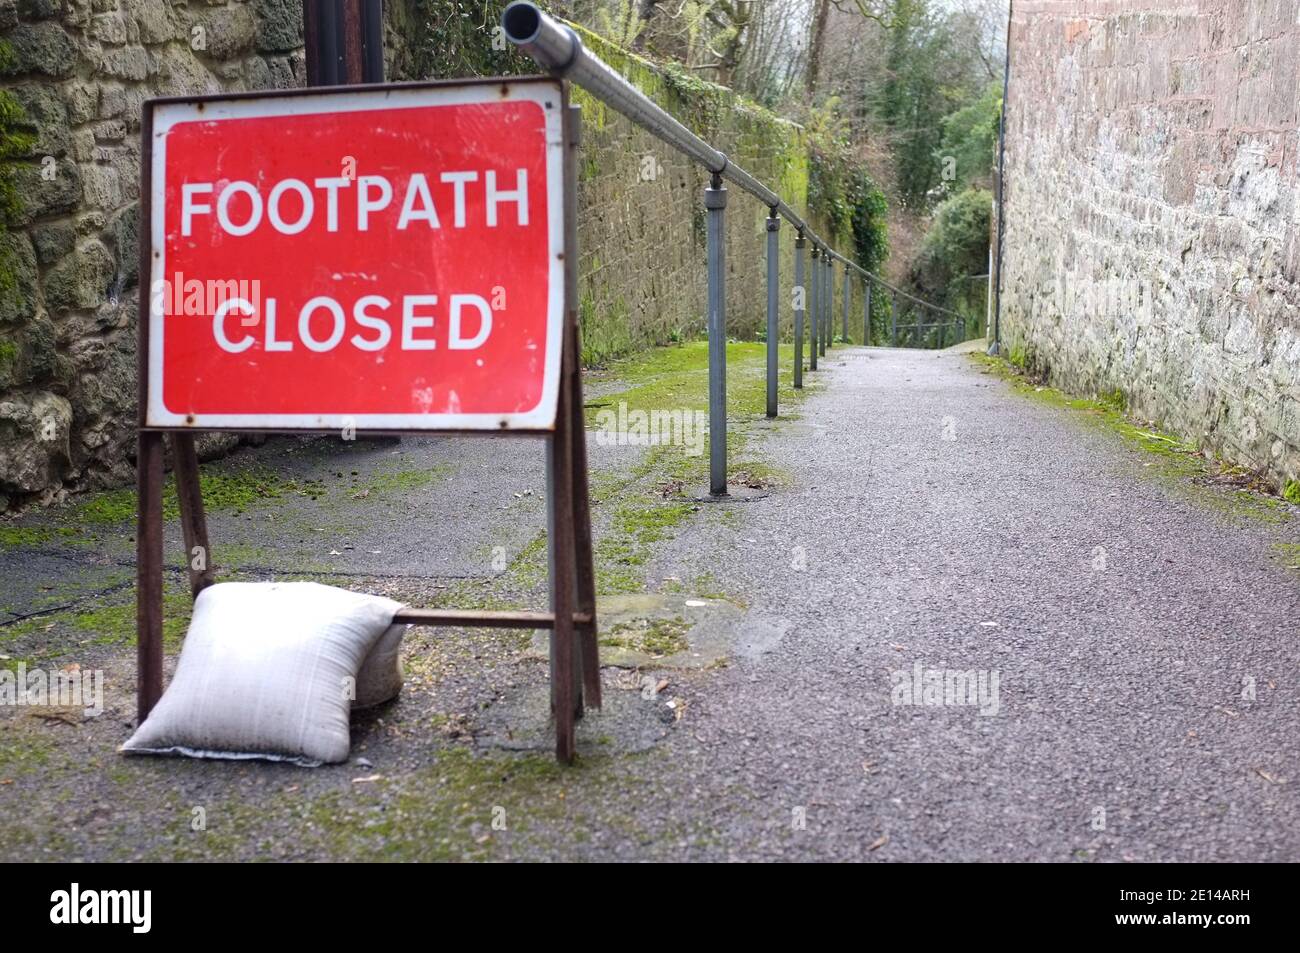 Footpath Closed sign on a steep path in Shaftesbury, Dorset. UK. Stock Photo